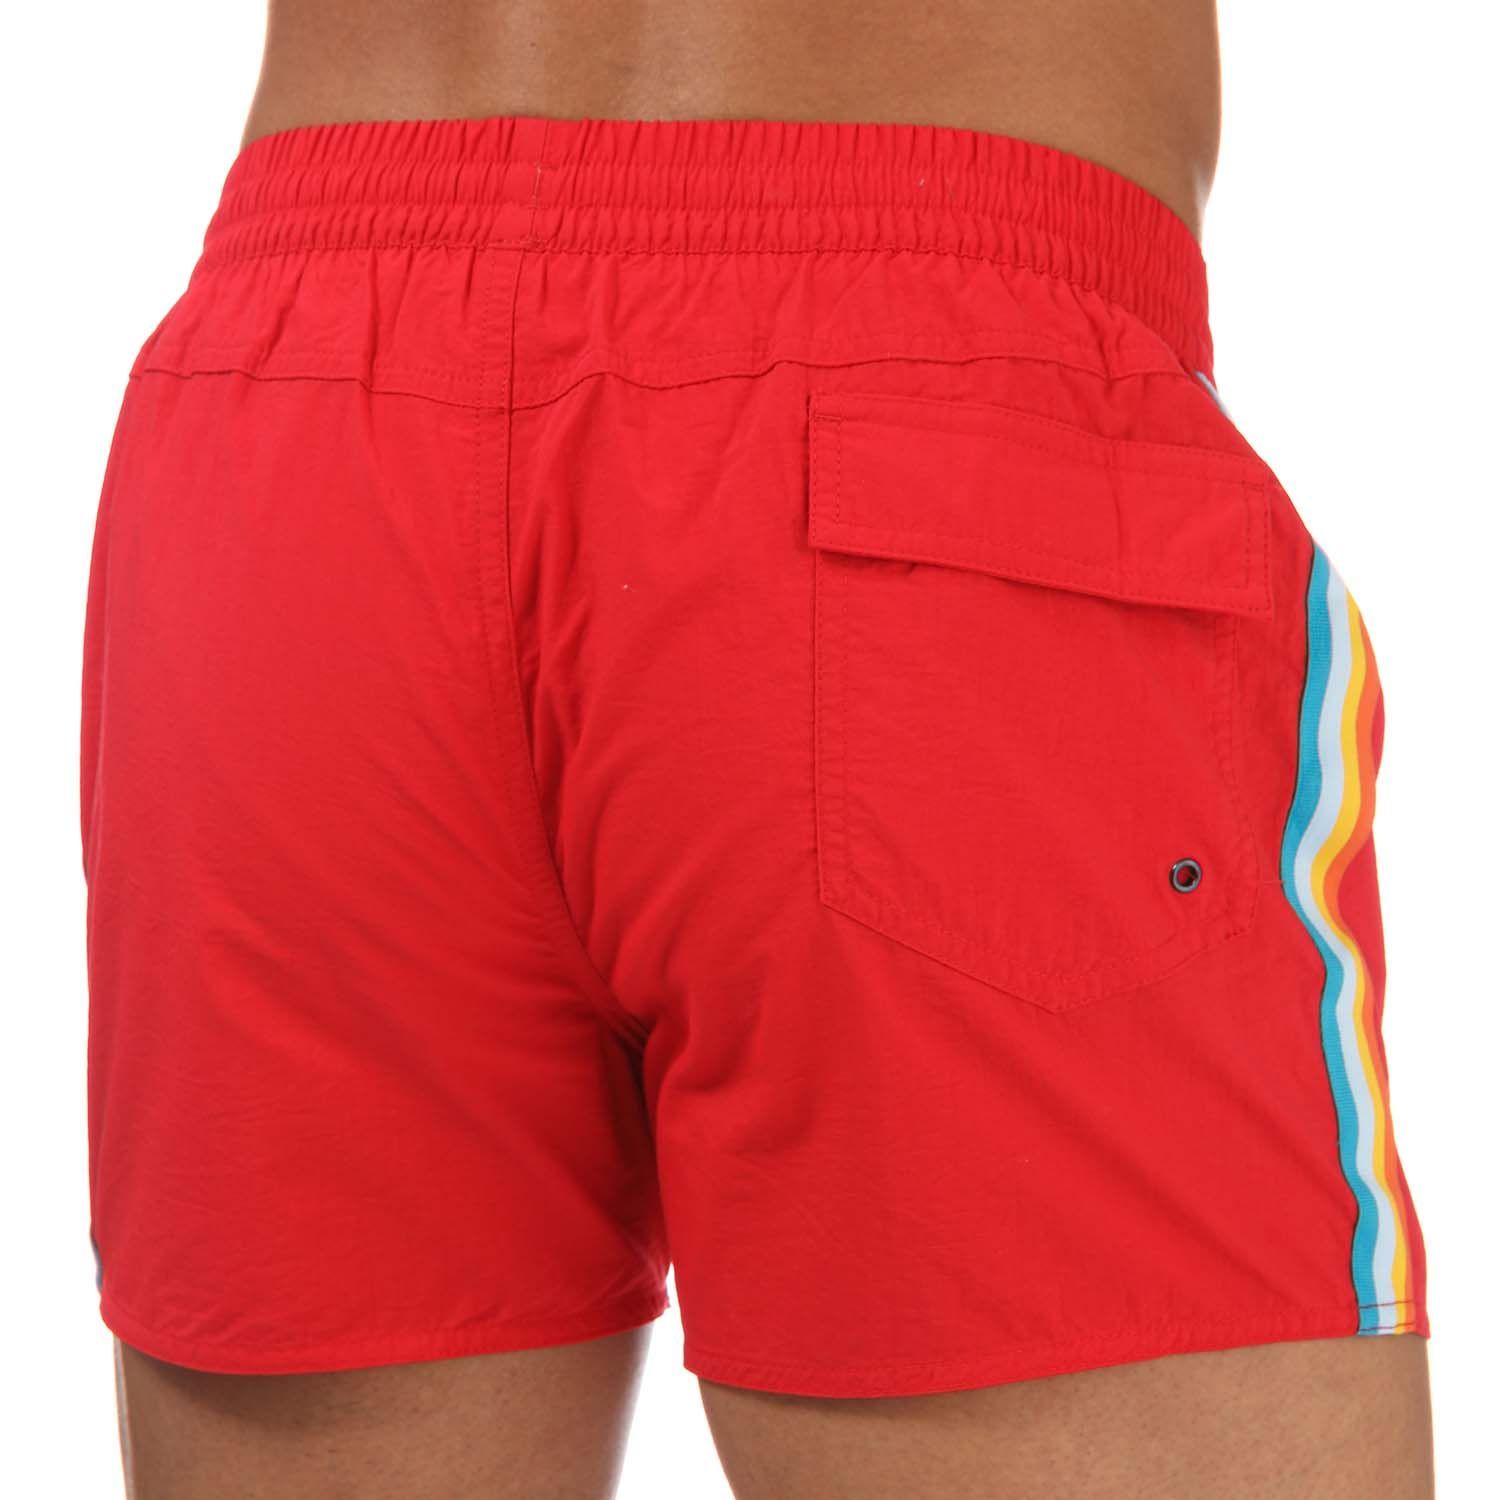 Mens Speedo Retro Swim Short in red.- Elasticated waistband and drawstring fastening.- Back pocket with water drainage and inner front coin - key pocket.- Mesh inner brief.- Chequered tape detailing and flattering.- Slim fit.- Body: 100% Recycled Nylon. Lining: 100% Polyester.- 8124366446Please note that returns will only be accepted if the hygiene label is still attached to the product.